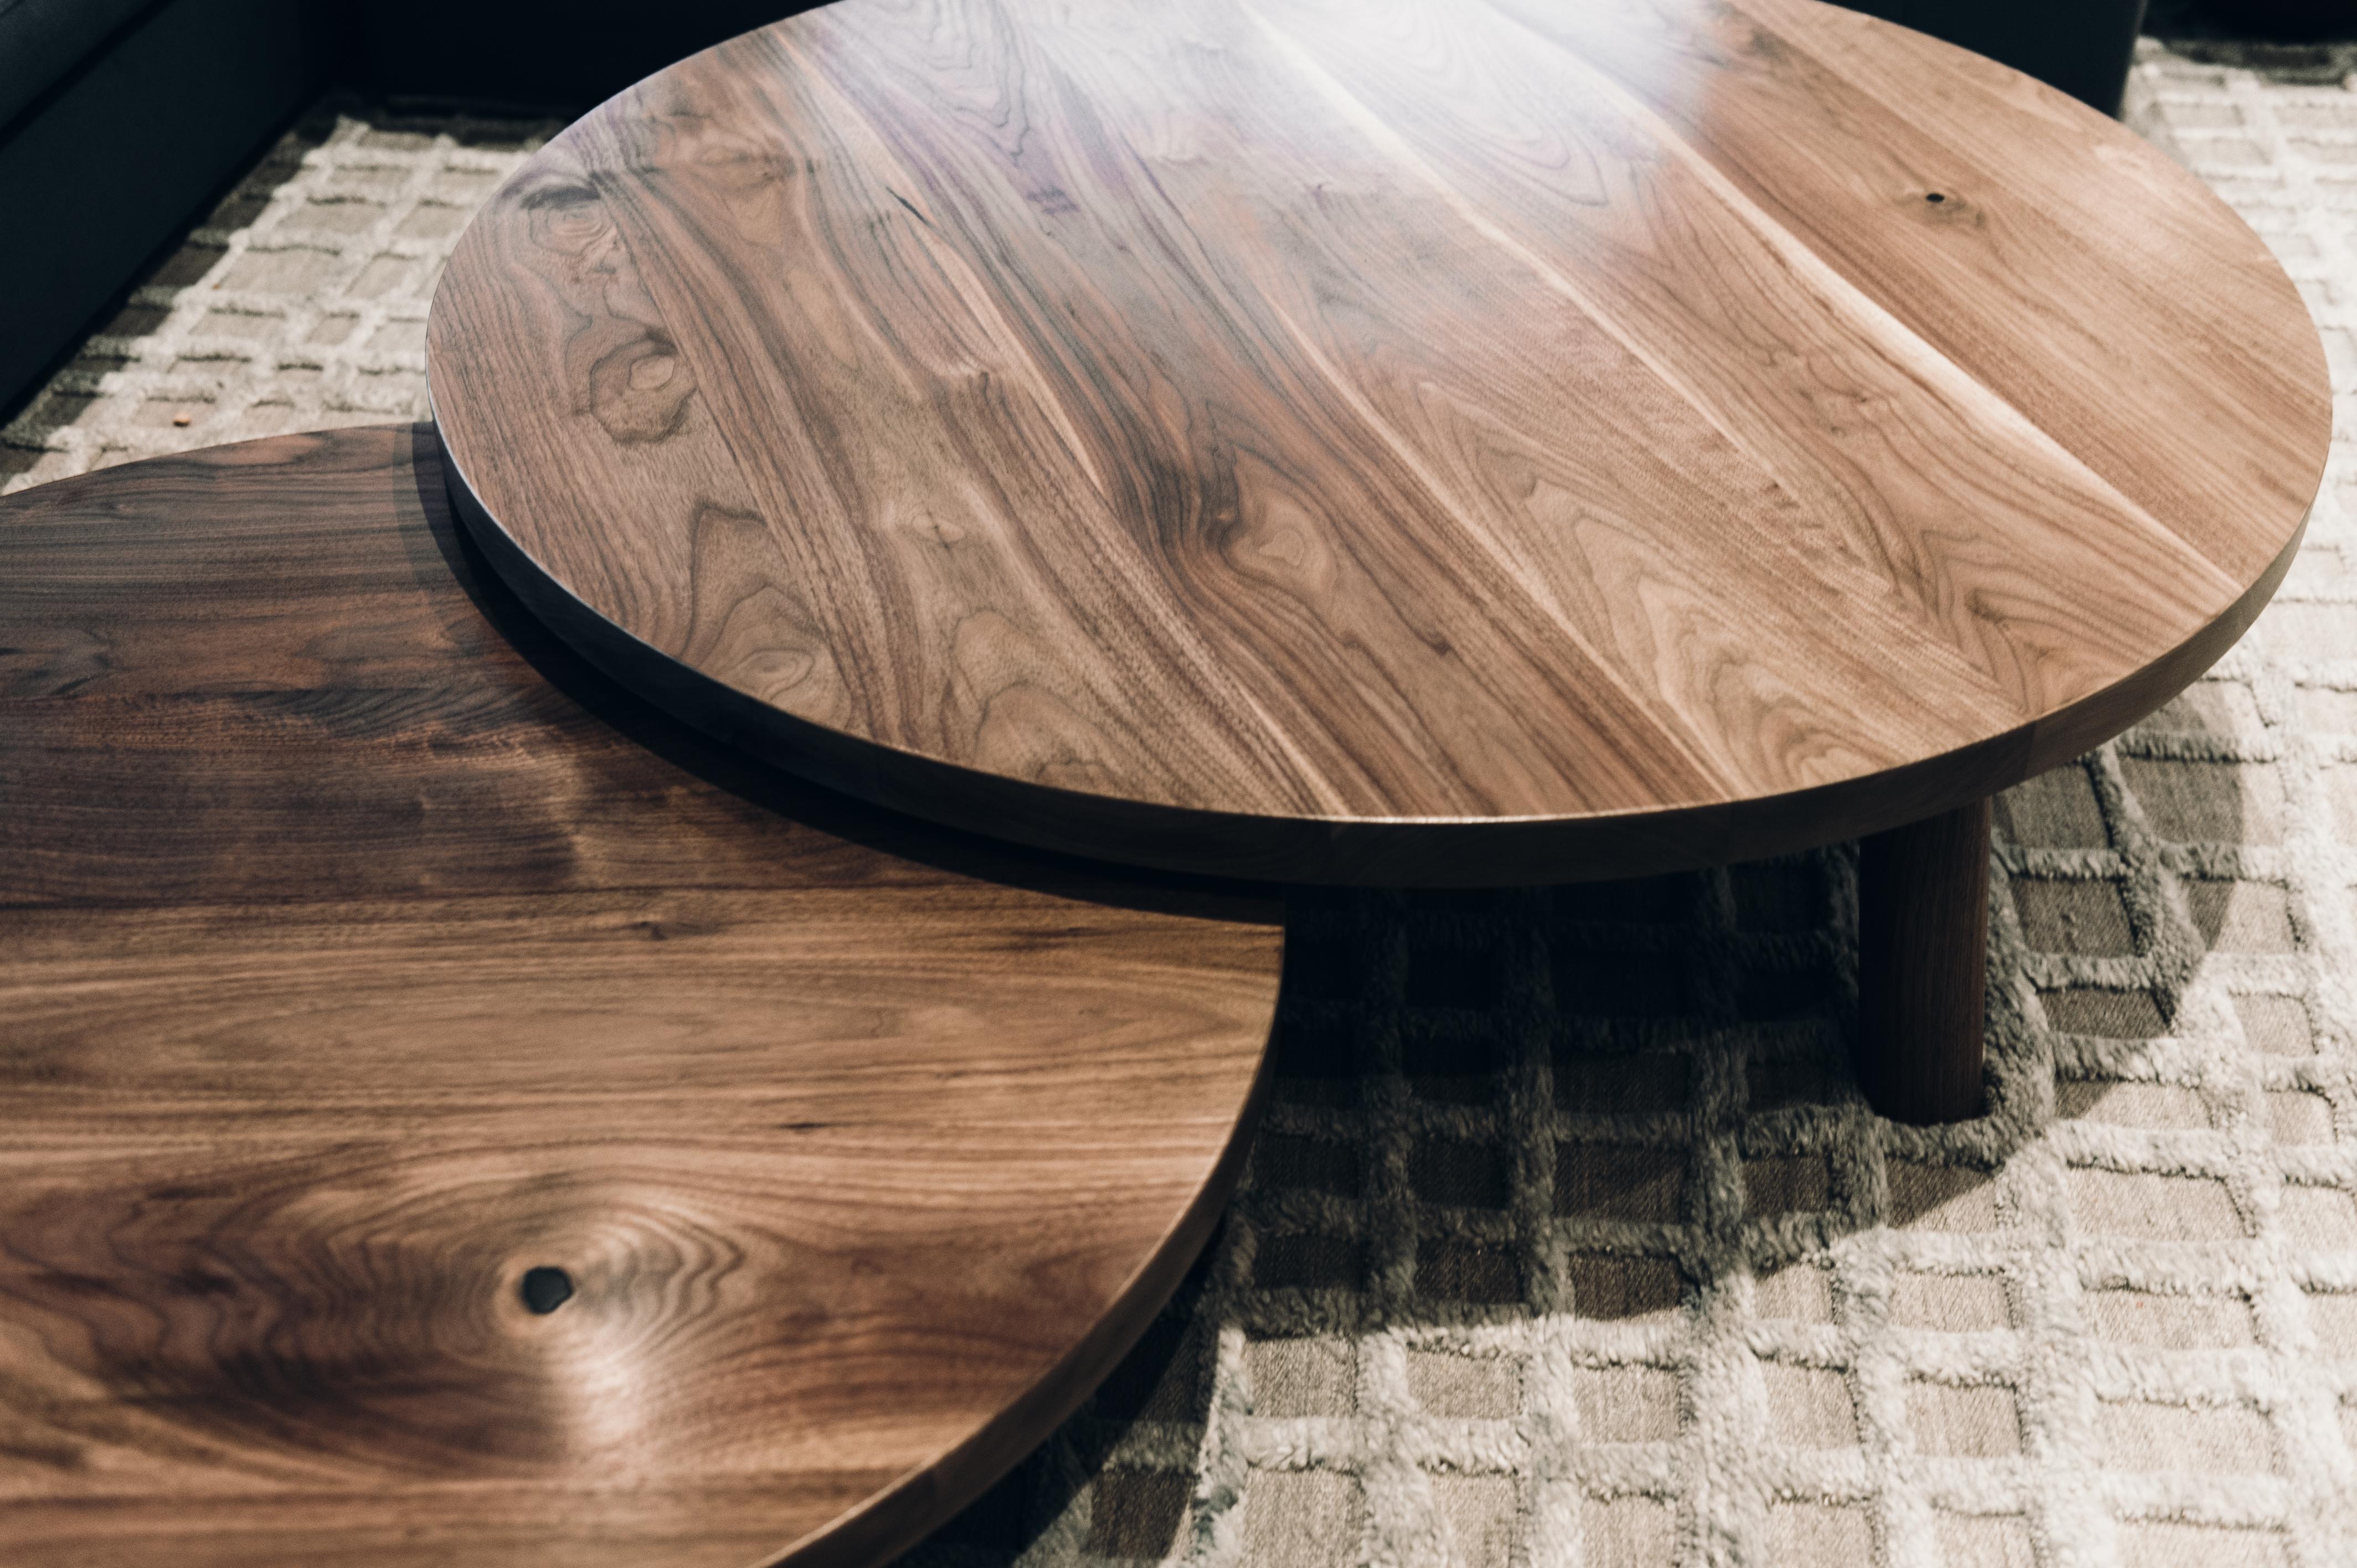 A fluid set of coffee tables that will adjust to any room or scenario thrown their way. These are handcrafted from thoughtfully sourced local walnut and built by our team of artisans. Each table features 3 legs are turned in by us in house. They